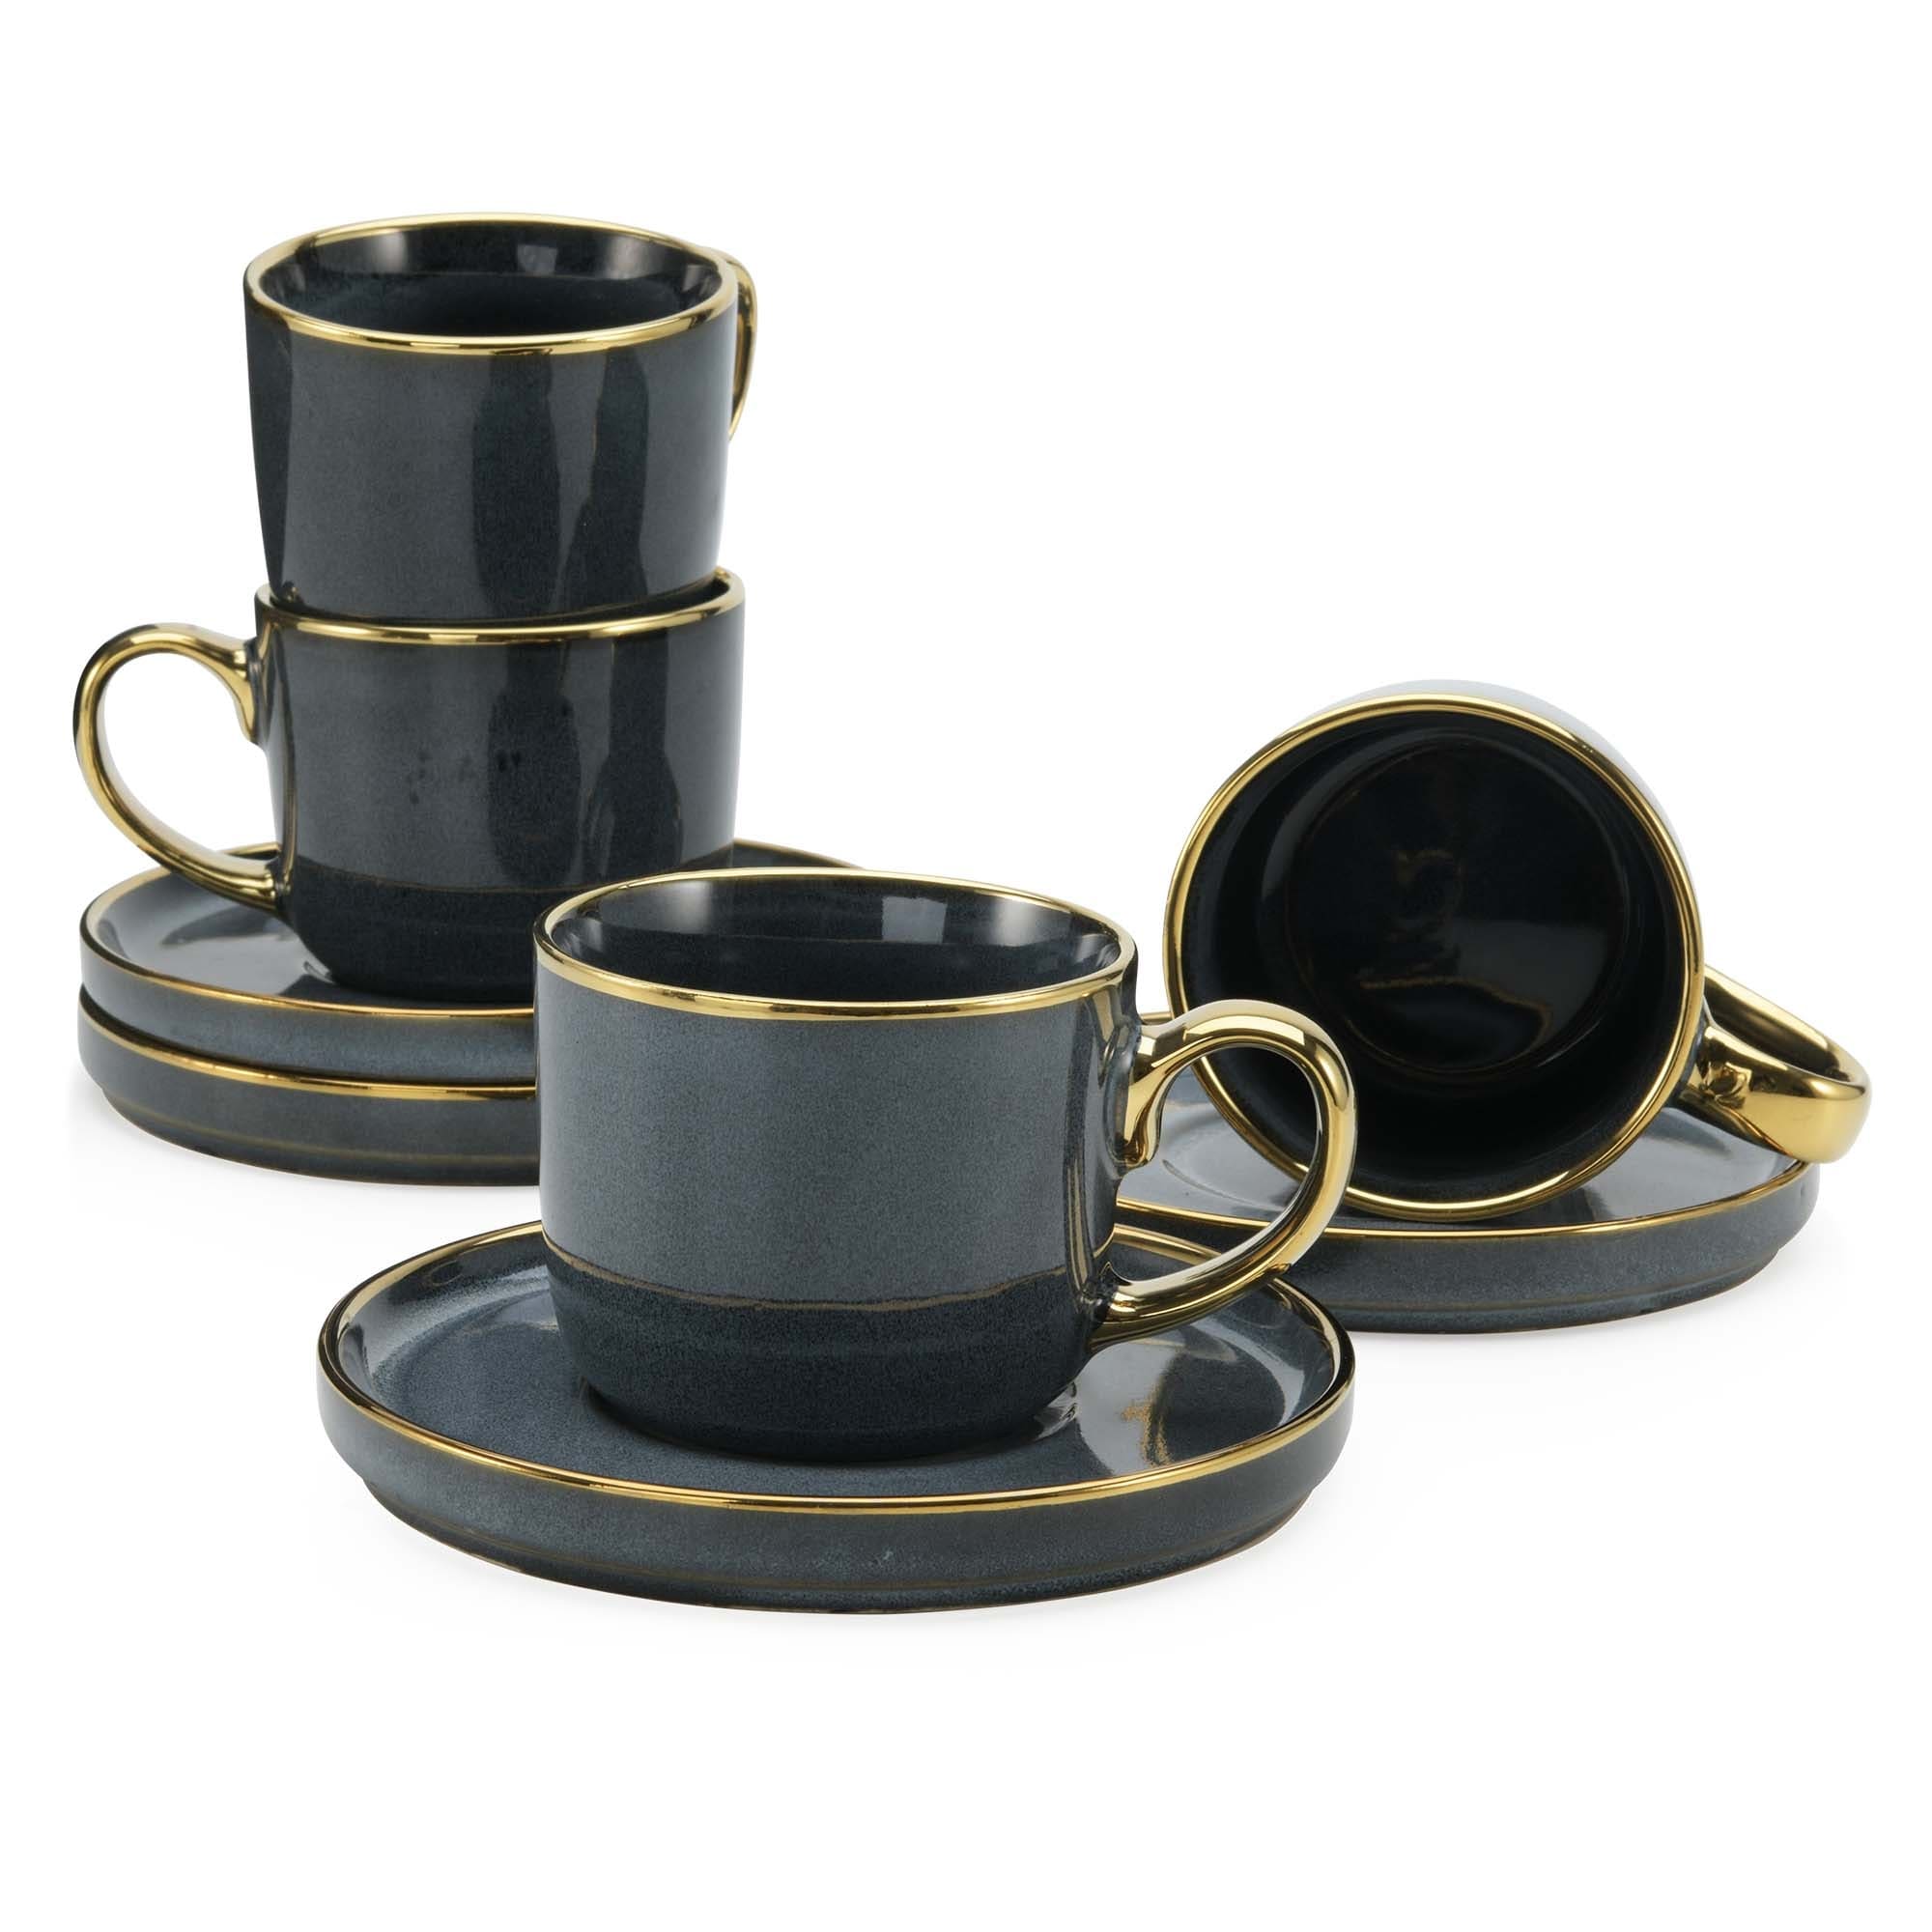 American Atelier Gold Rimmed Teacup and Saucer Set...